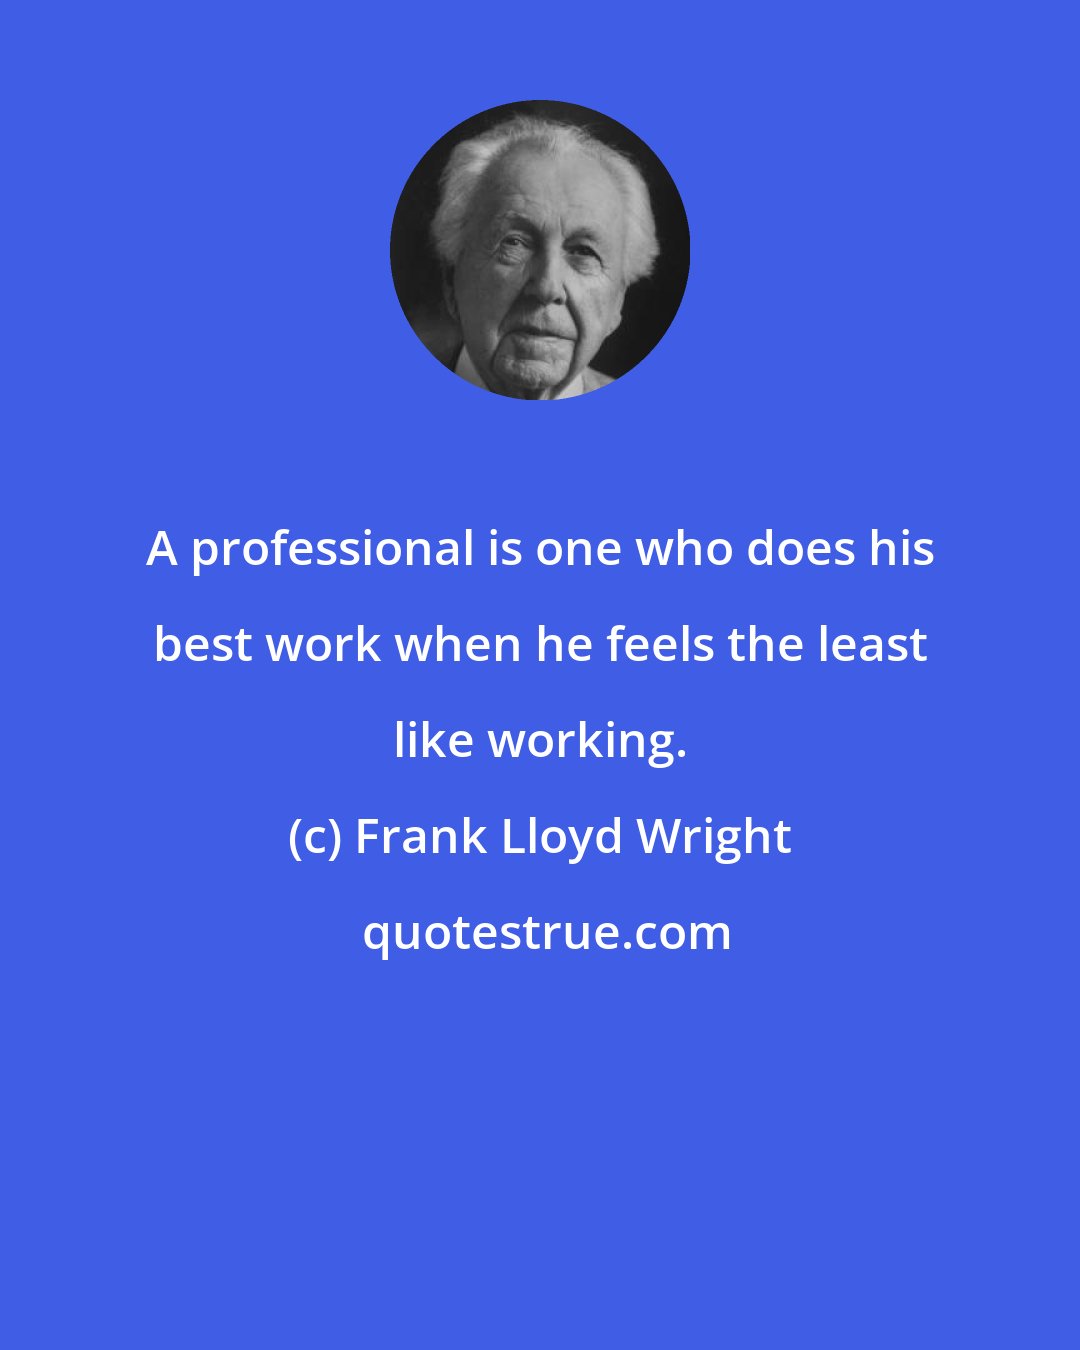 Frank Lloyd Wright: A professional is one who does his best work when he feels the least like working.